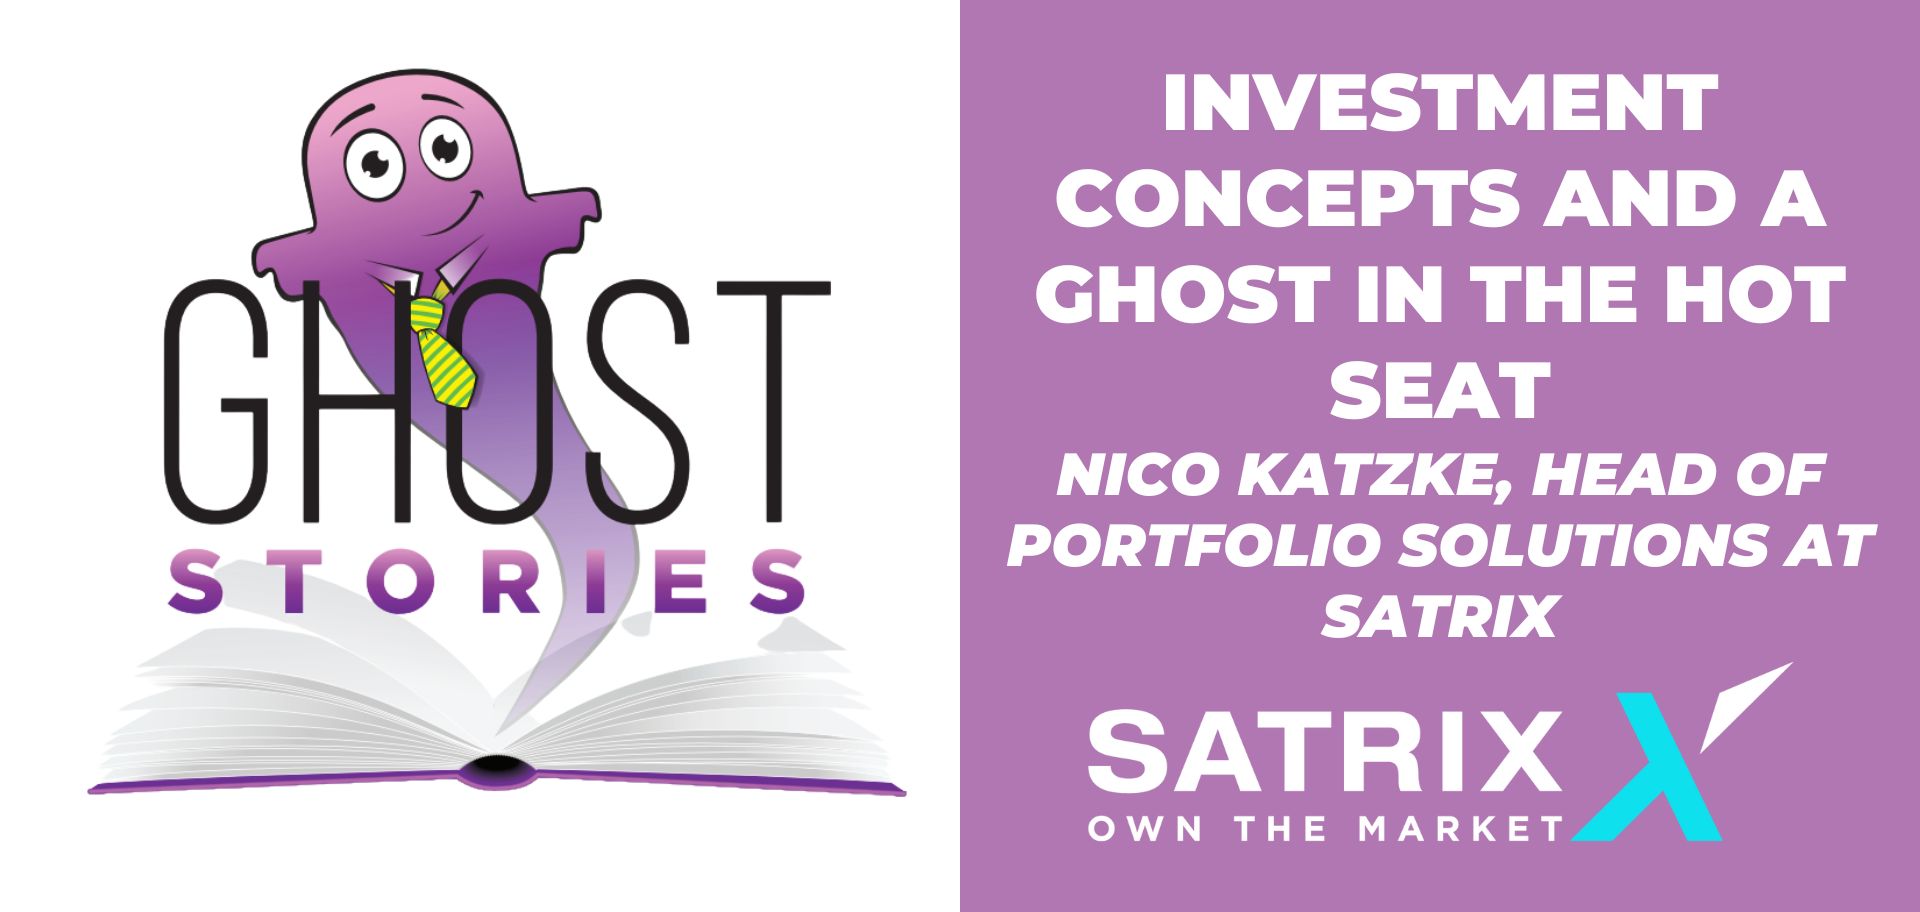 Ghost Stories Ep24: Investment Concepts and a Ghost in the Hot Seat (with Nico Katzke of Satrix)